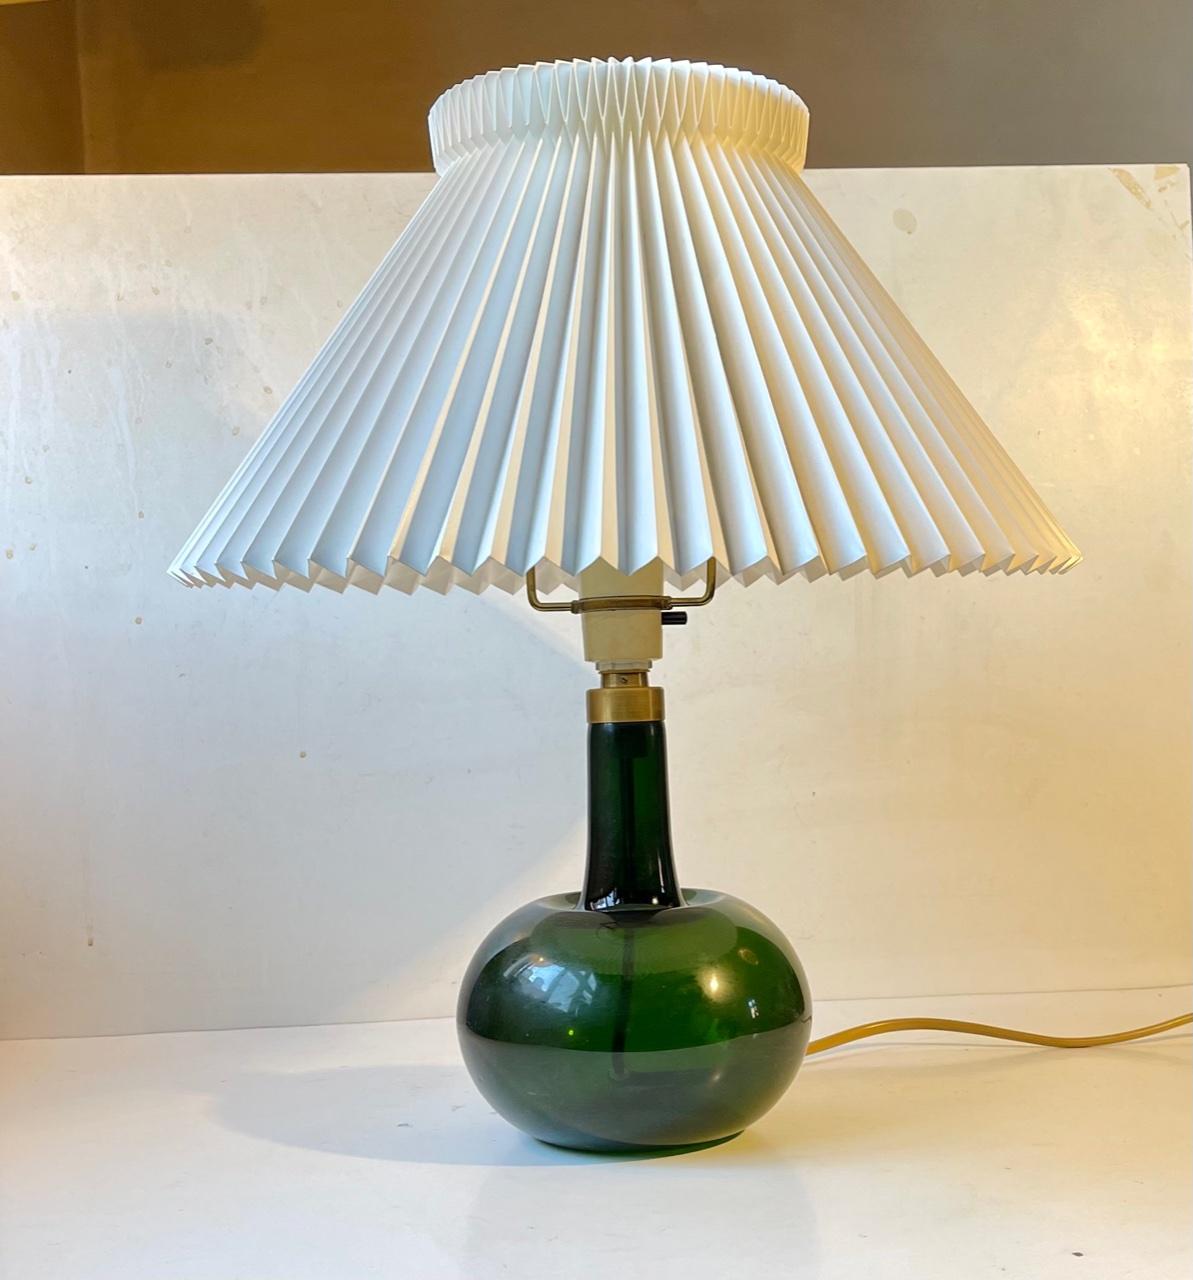 Handblown deep green glass table lamp designed by Michael Bang and manufactured by Holmegaard in Denmark during the late 1970. It is called Fleur. Label from Holmegaard still present beneath the base. Height with shade holder: 38 cm.The shade holder